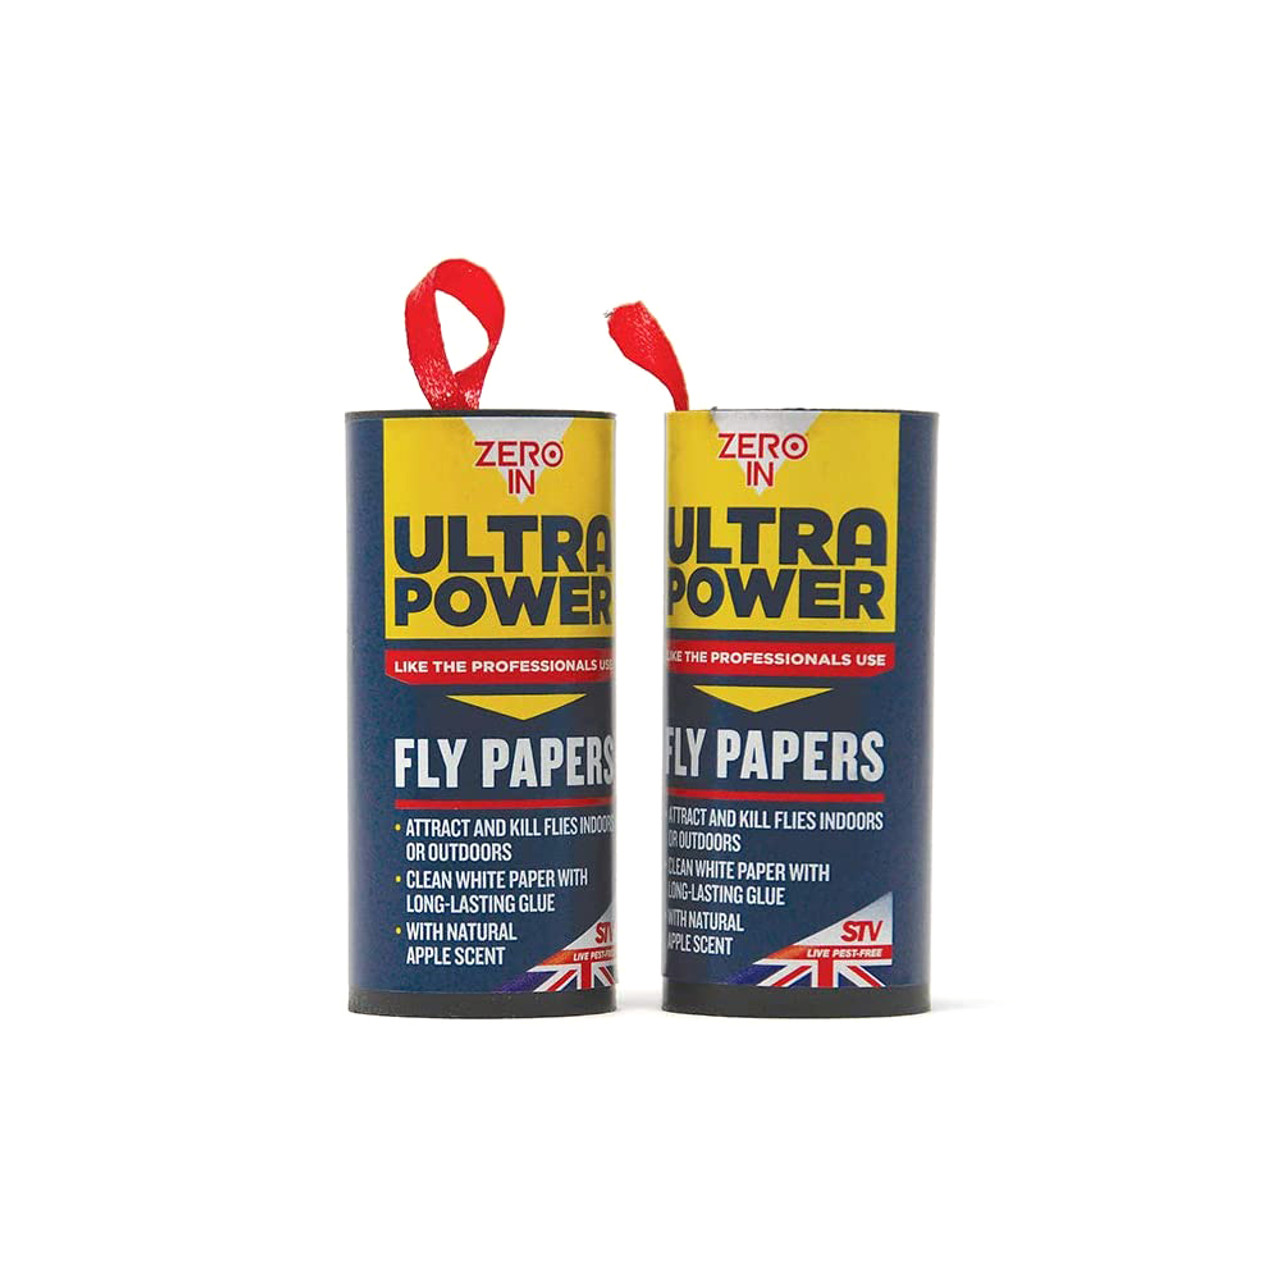 https://cdn11.bigcommerce.com/s-lmuttm1jiv/images/stencil/1280x1280/products/401/1392/Zero-In-Ultra-Power-Fly-Papers-Poison-free-Kills-Insects-in-Homes-Value-Pack-24-Alt-2__47939.1592950352.jpg?c=2?imbypass=on